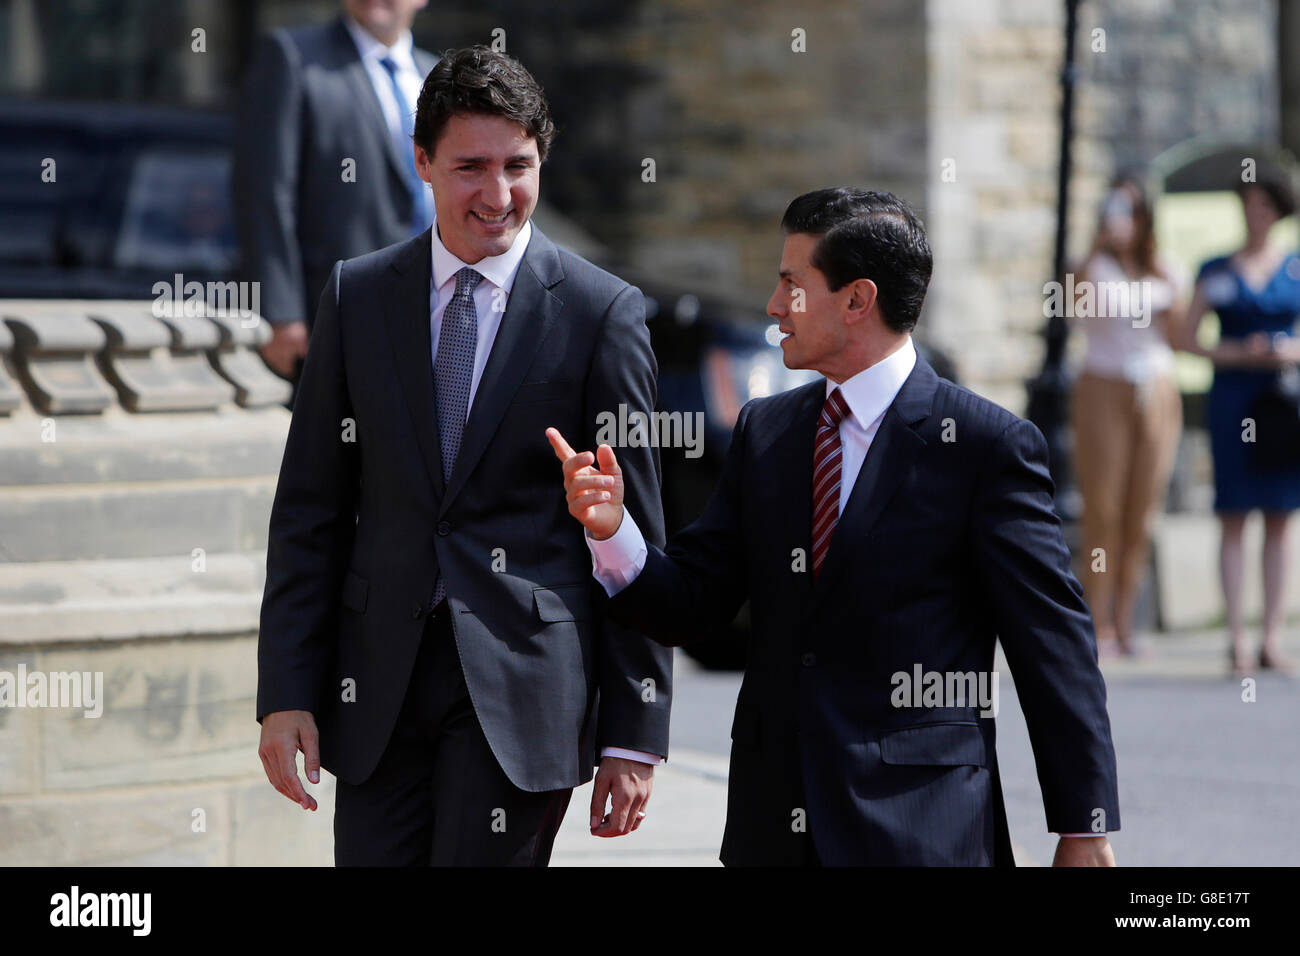 Ottawa, Canada on June 28. 1st Dec, 2016. Canada's Prime Minister Justin Trudeau(L) walks with Mexican President Enrique Pena Nieto at Parliament Hill in Ottawa, Canada on June 28, 2016. Canadian Prime Minister Justin Trudeau Tuesday announced his government's intention to lift the visa requirement for Mexican visitors beginning on Dec. 1, 2016. © David Kawai/Xinhua/Alamy Live News Stock Photo